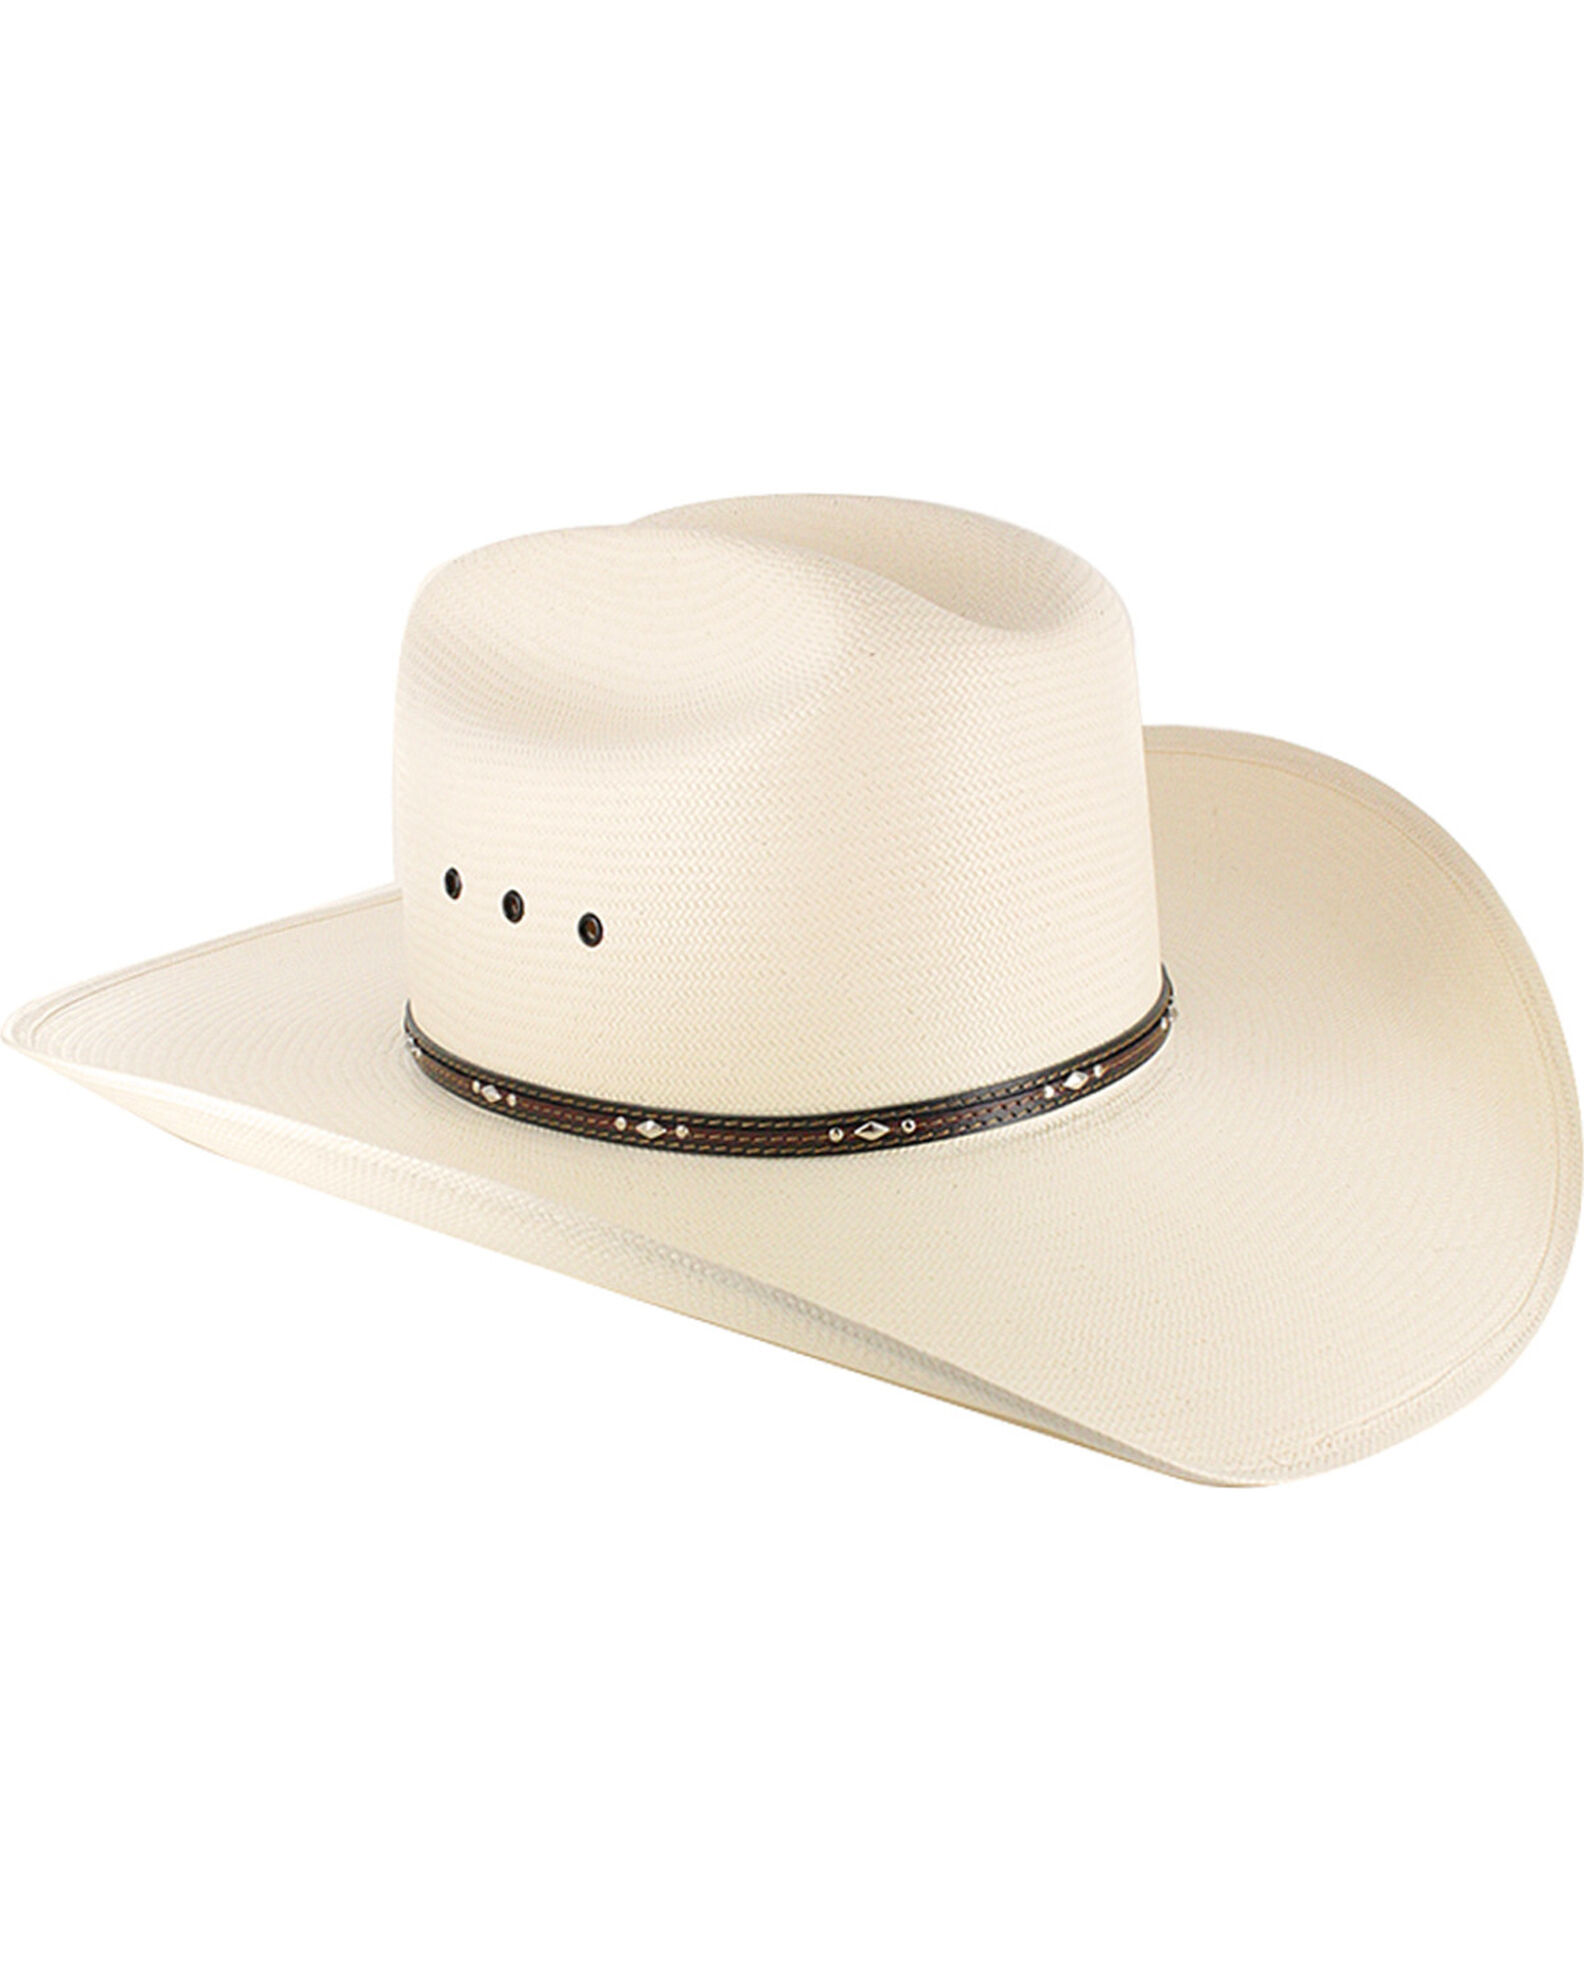 Men's Stetson Hats - Country Outfitter